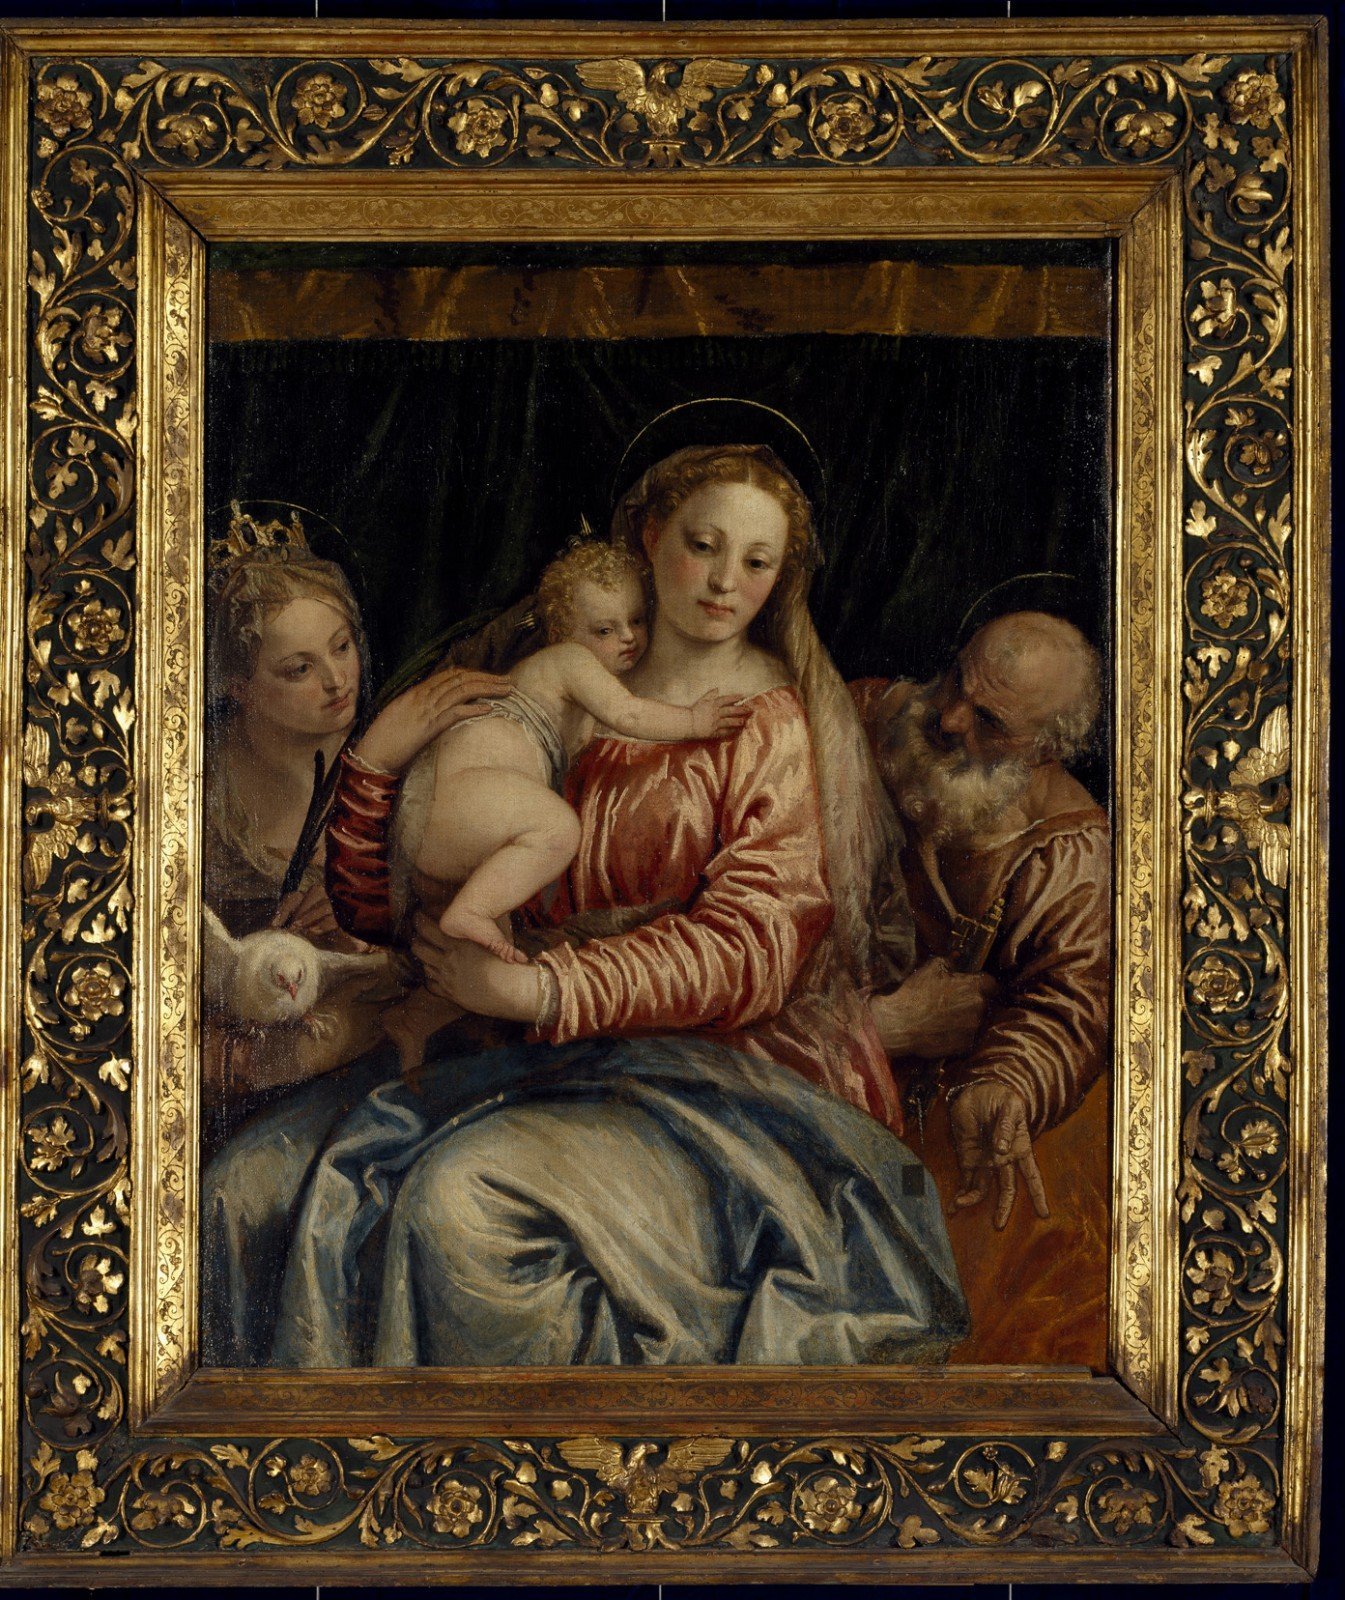 Paolo Veronese (1528-1588), “The Virgin and Child with Saint Peter and a Female Saint”, about, 1550-5, Oil on canvas, 119 × 95 cm. Pinacoteca Civica, Vicenza © Courtesy Musei Civici Vicenza